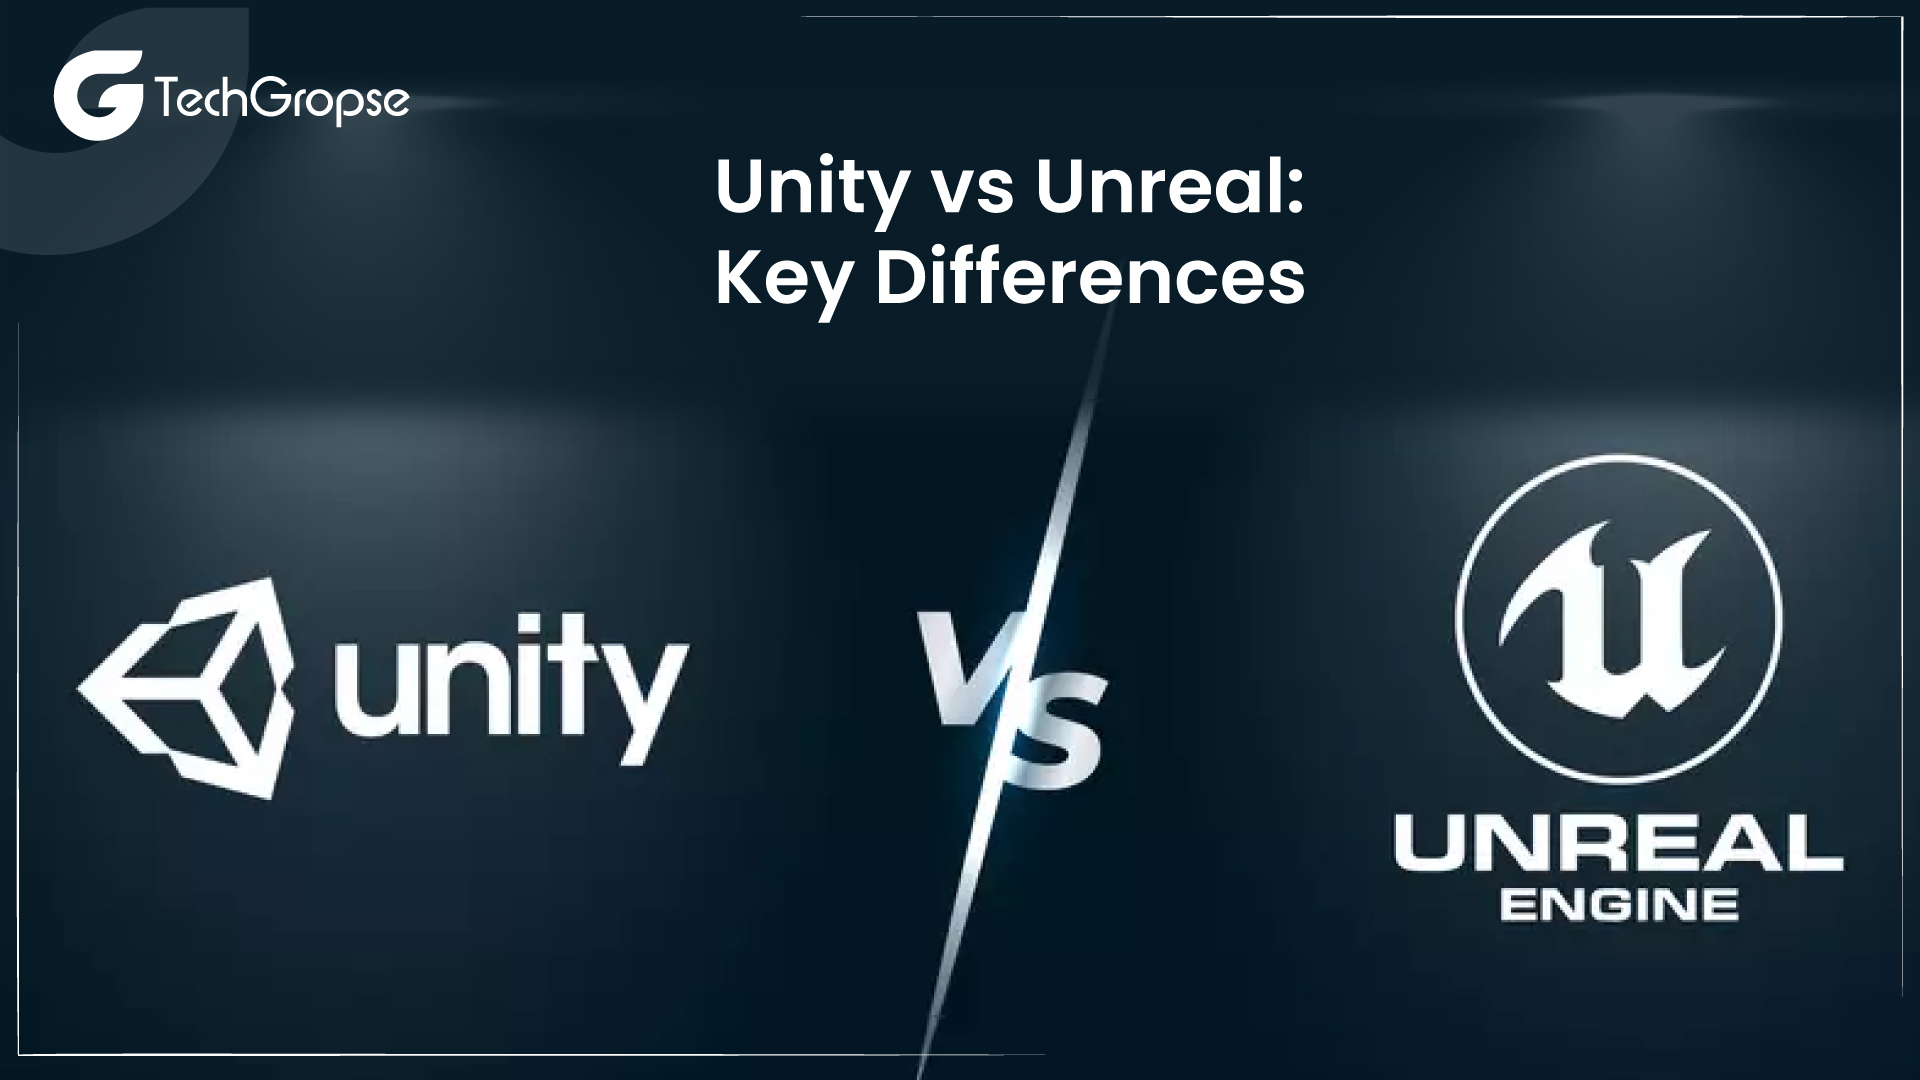 Unity vs Unreal: Key Differences